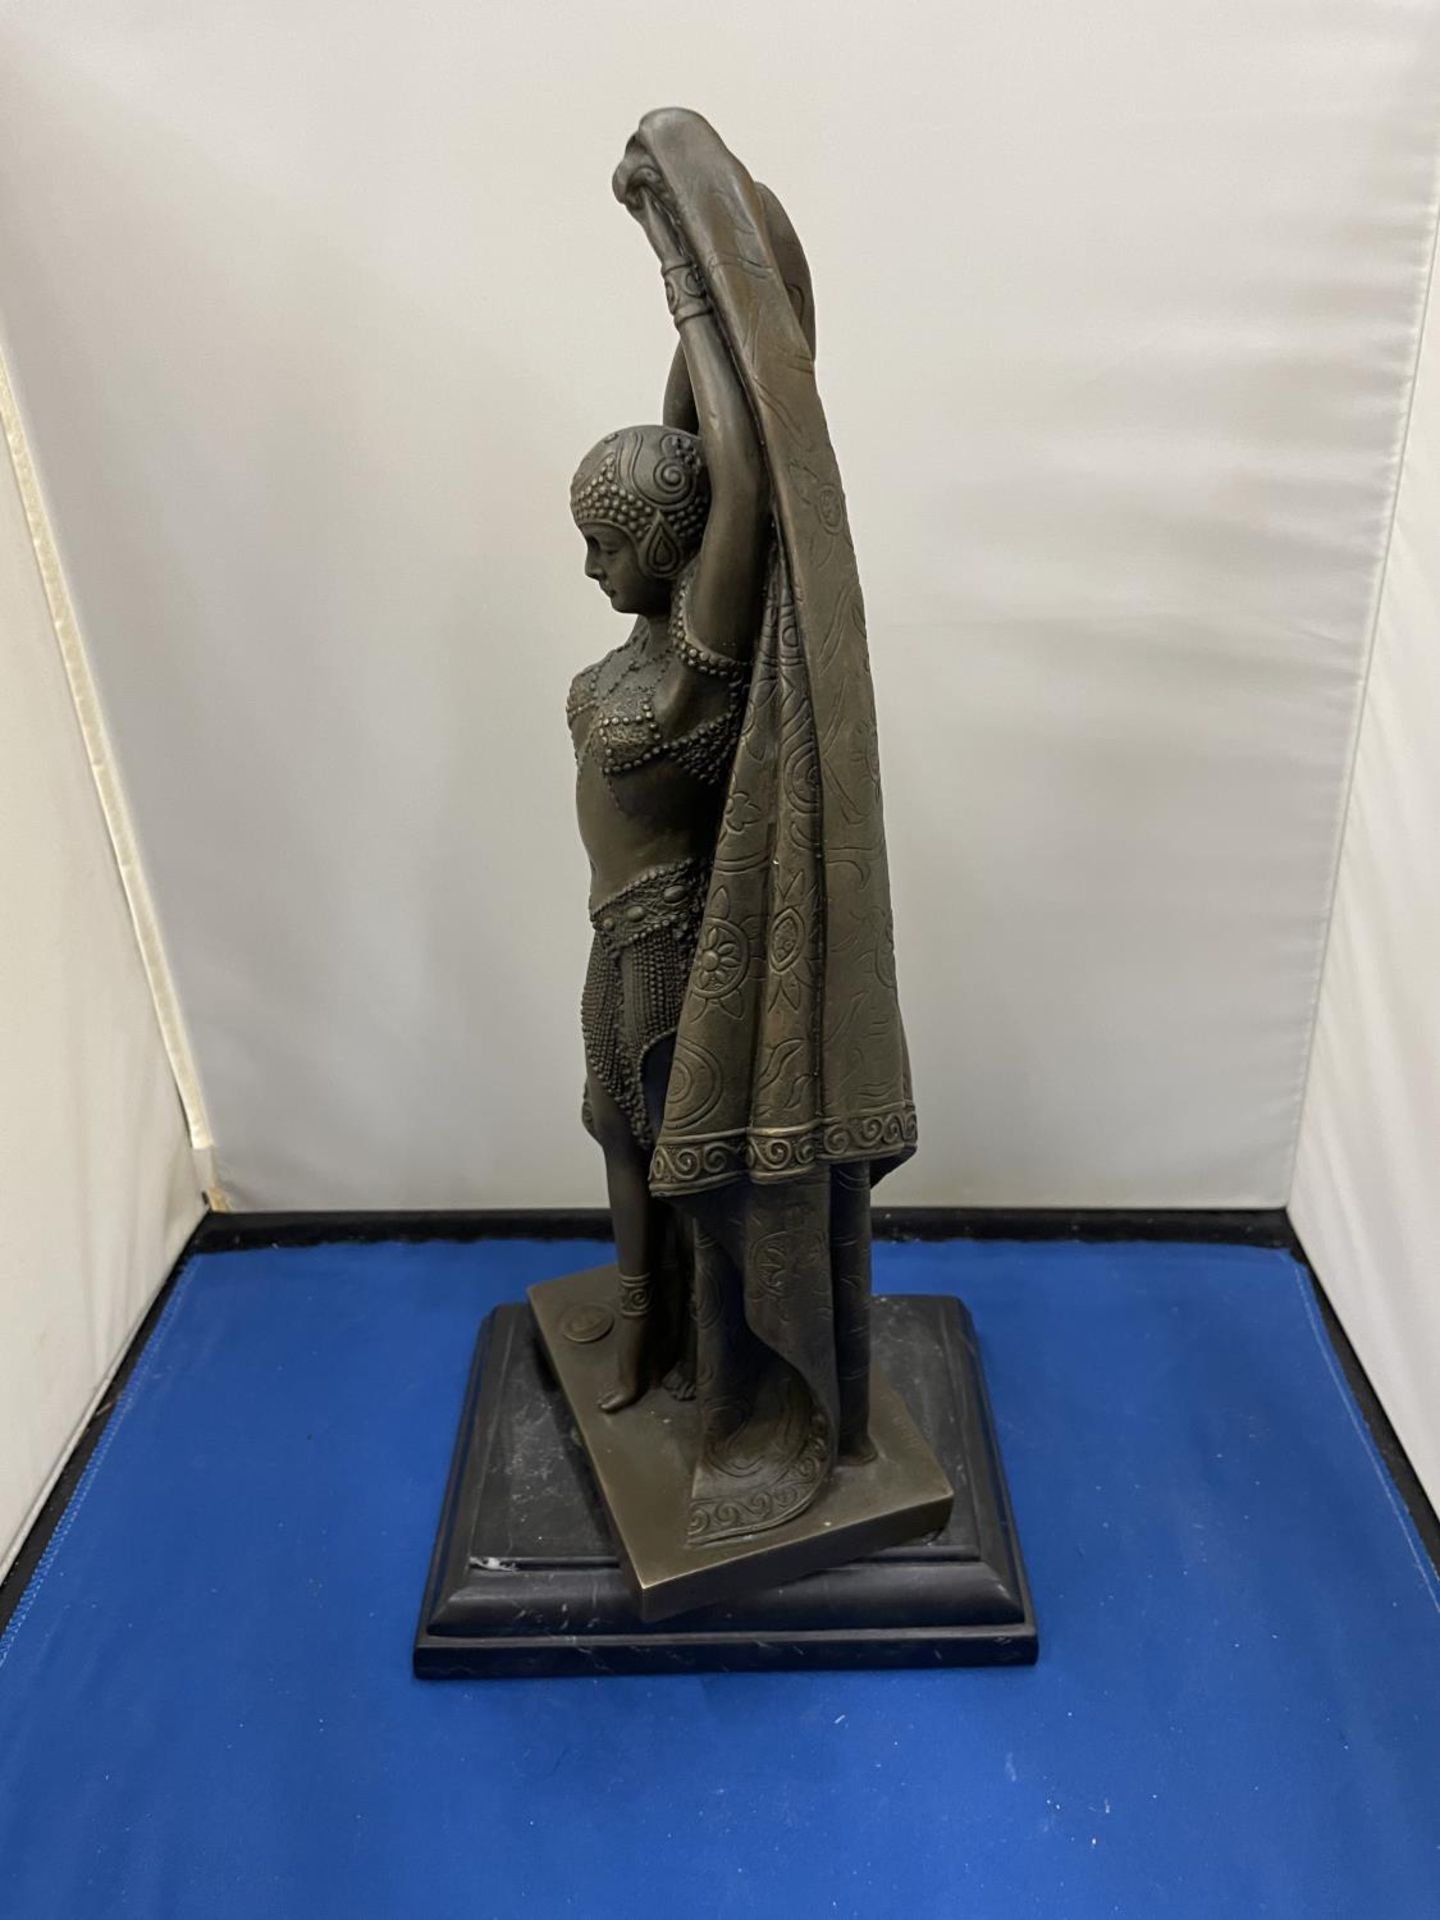 A ART NOUVEAU STYLE BRONZE AFTER DEMETRE CHIPARUS RAMESE'S ENTERTAINER DANCER ART WITH STAMP - Image 4 of 12